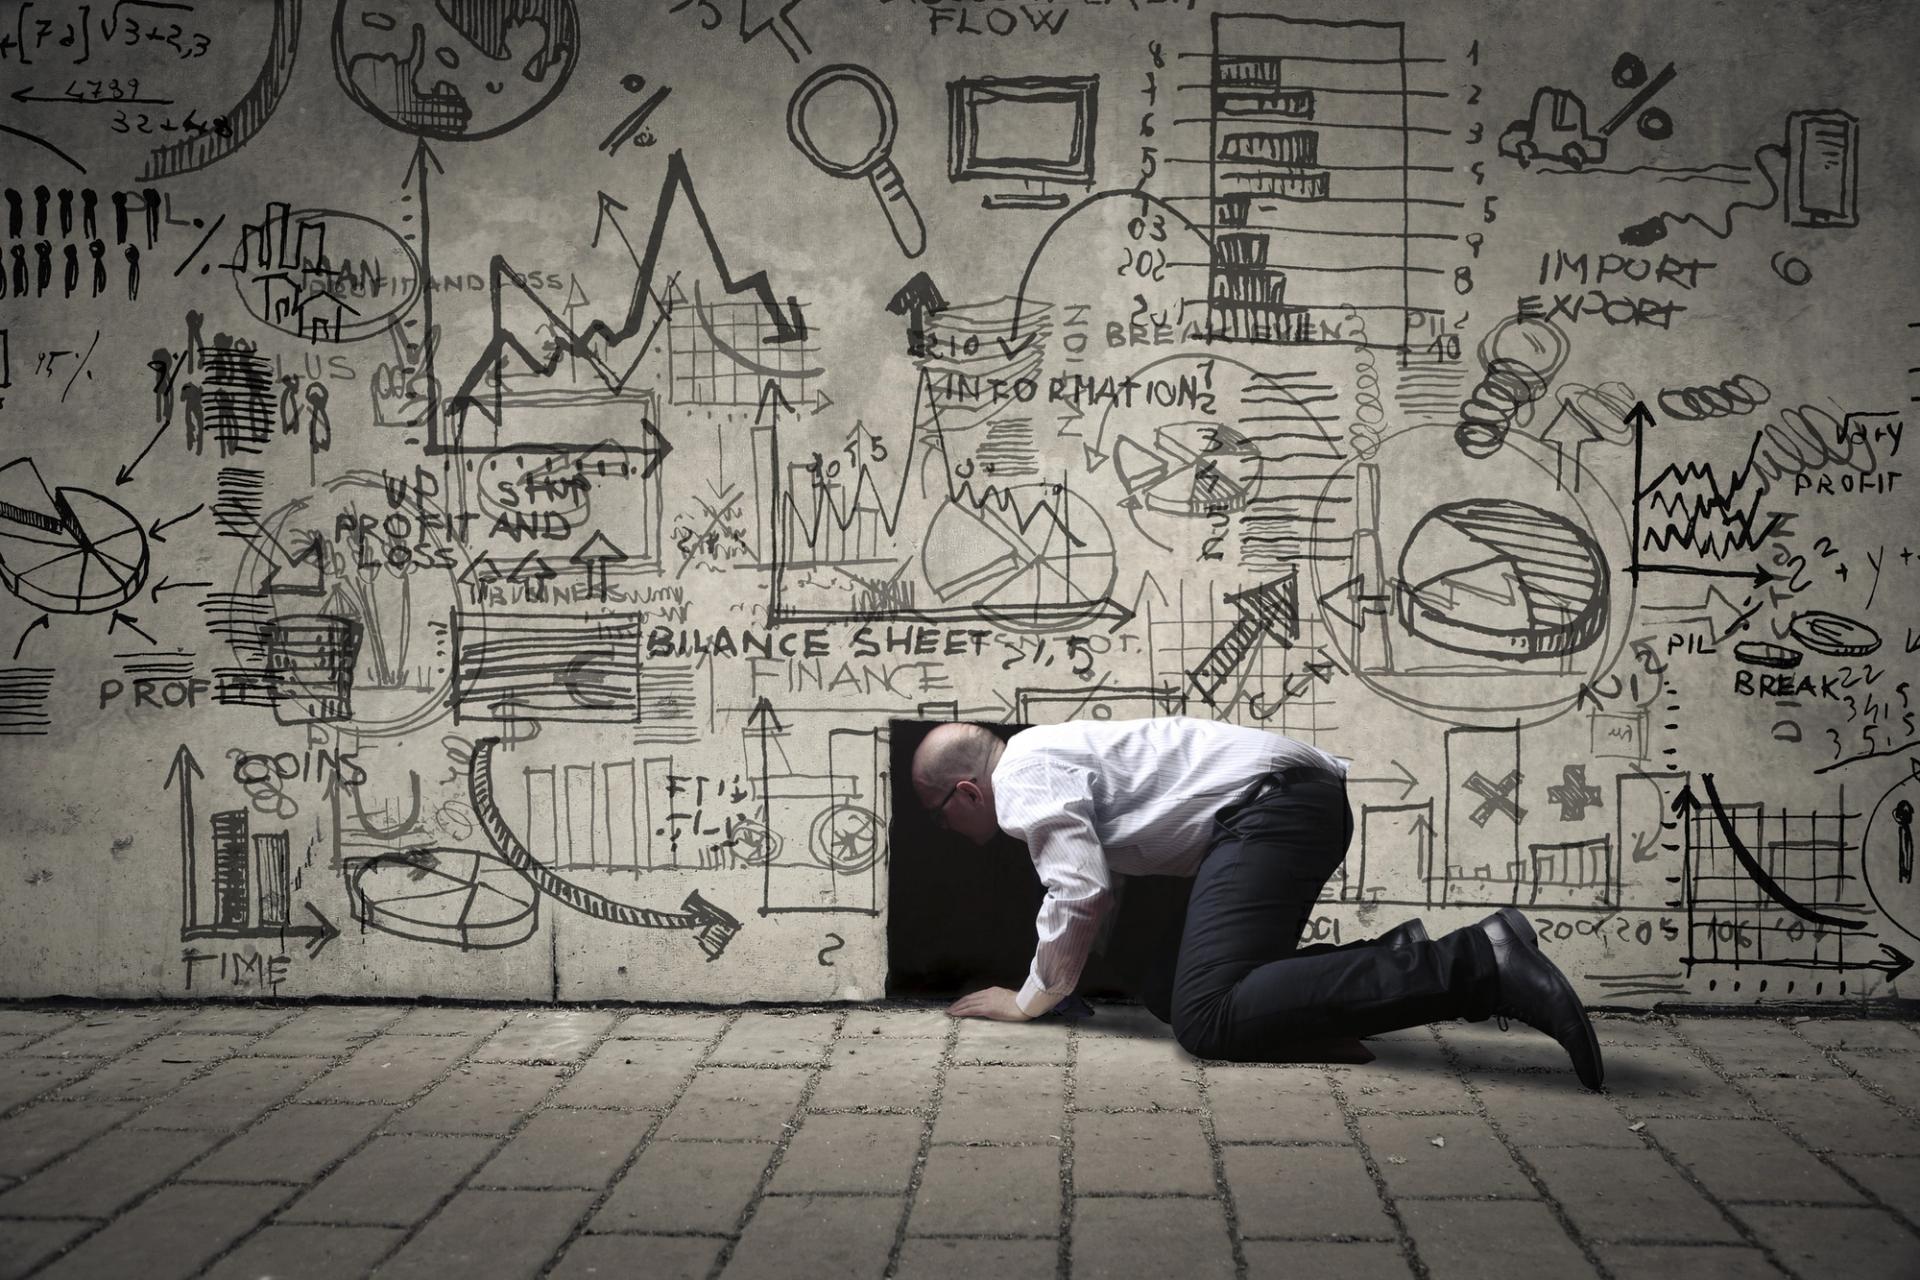 A man on hands and knees, crawling into a small gap in a wall covered with business-related sketches.